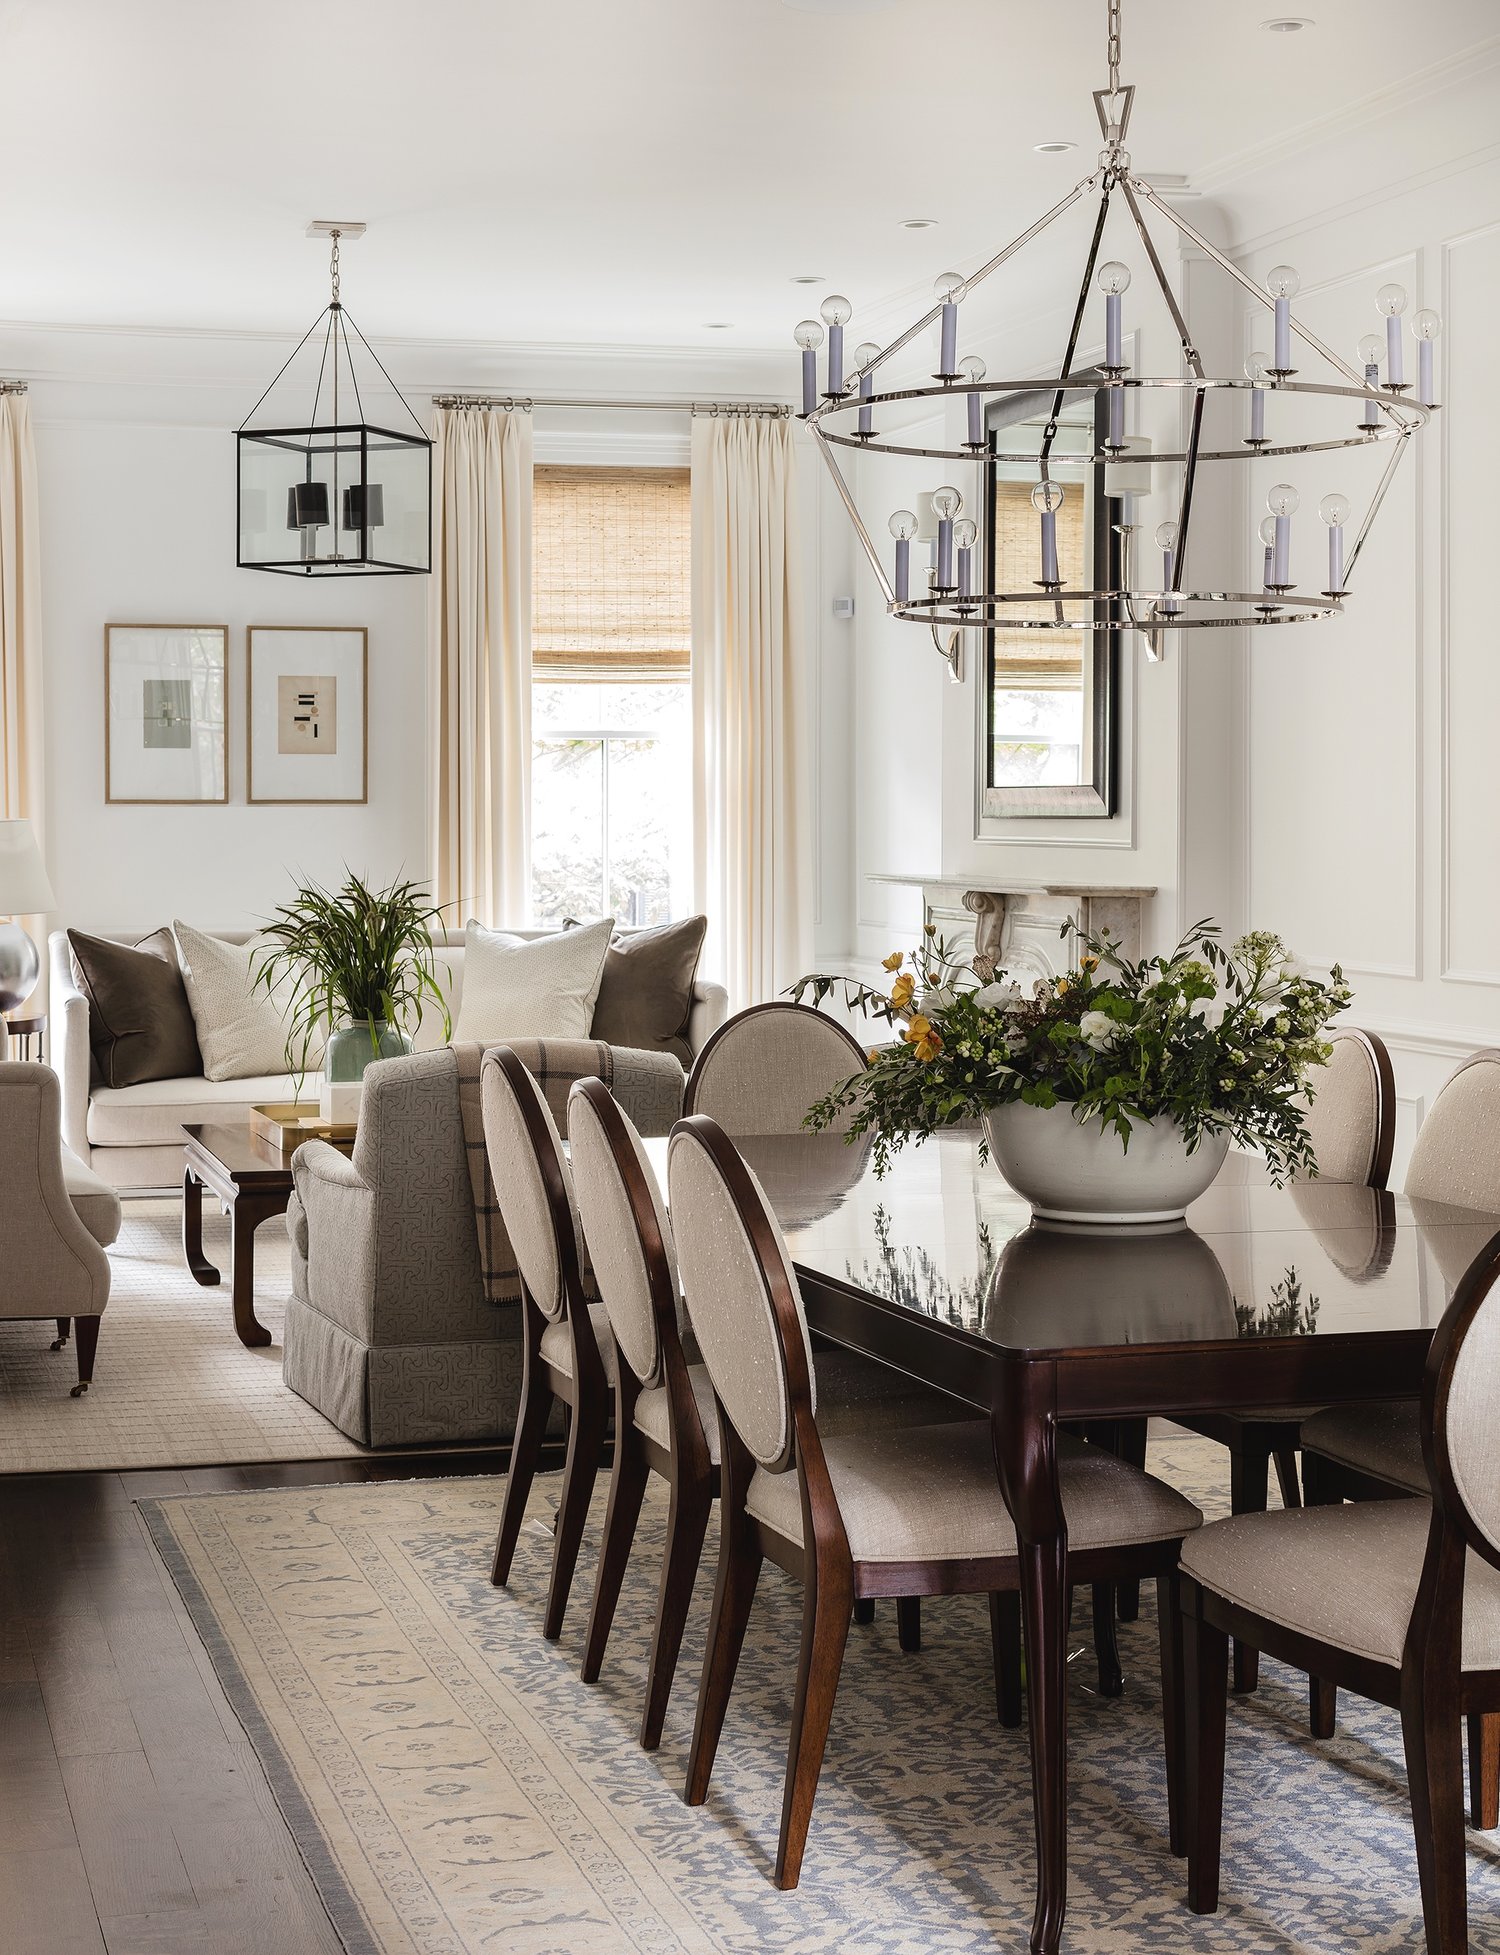 DESIGNING A TIMELESS HOME IS NO EASY FEAT, BUT THIS HOME NAILED IT | lark & linen